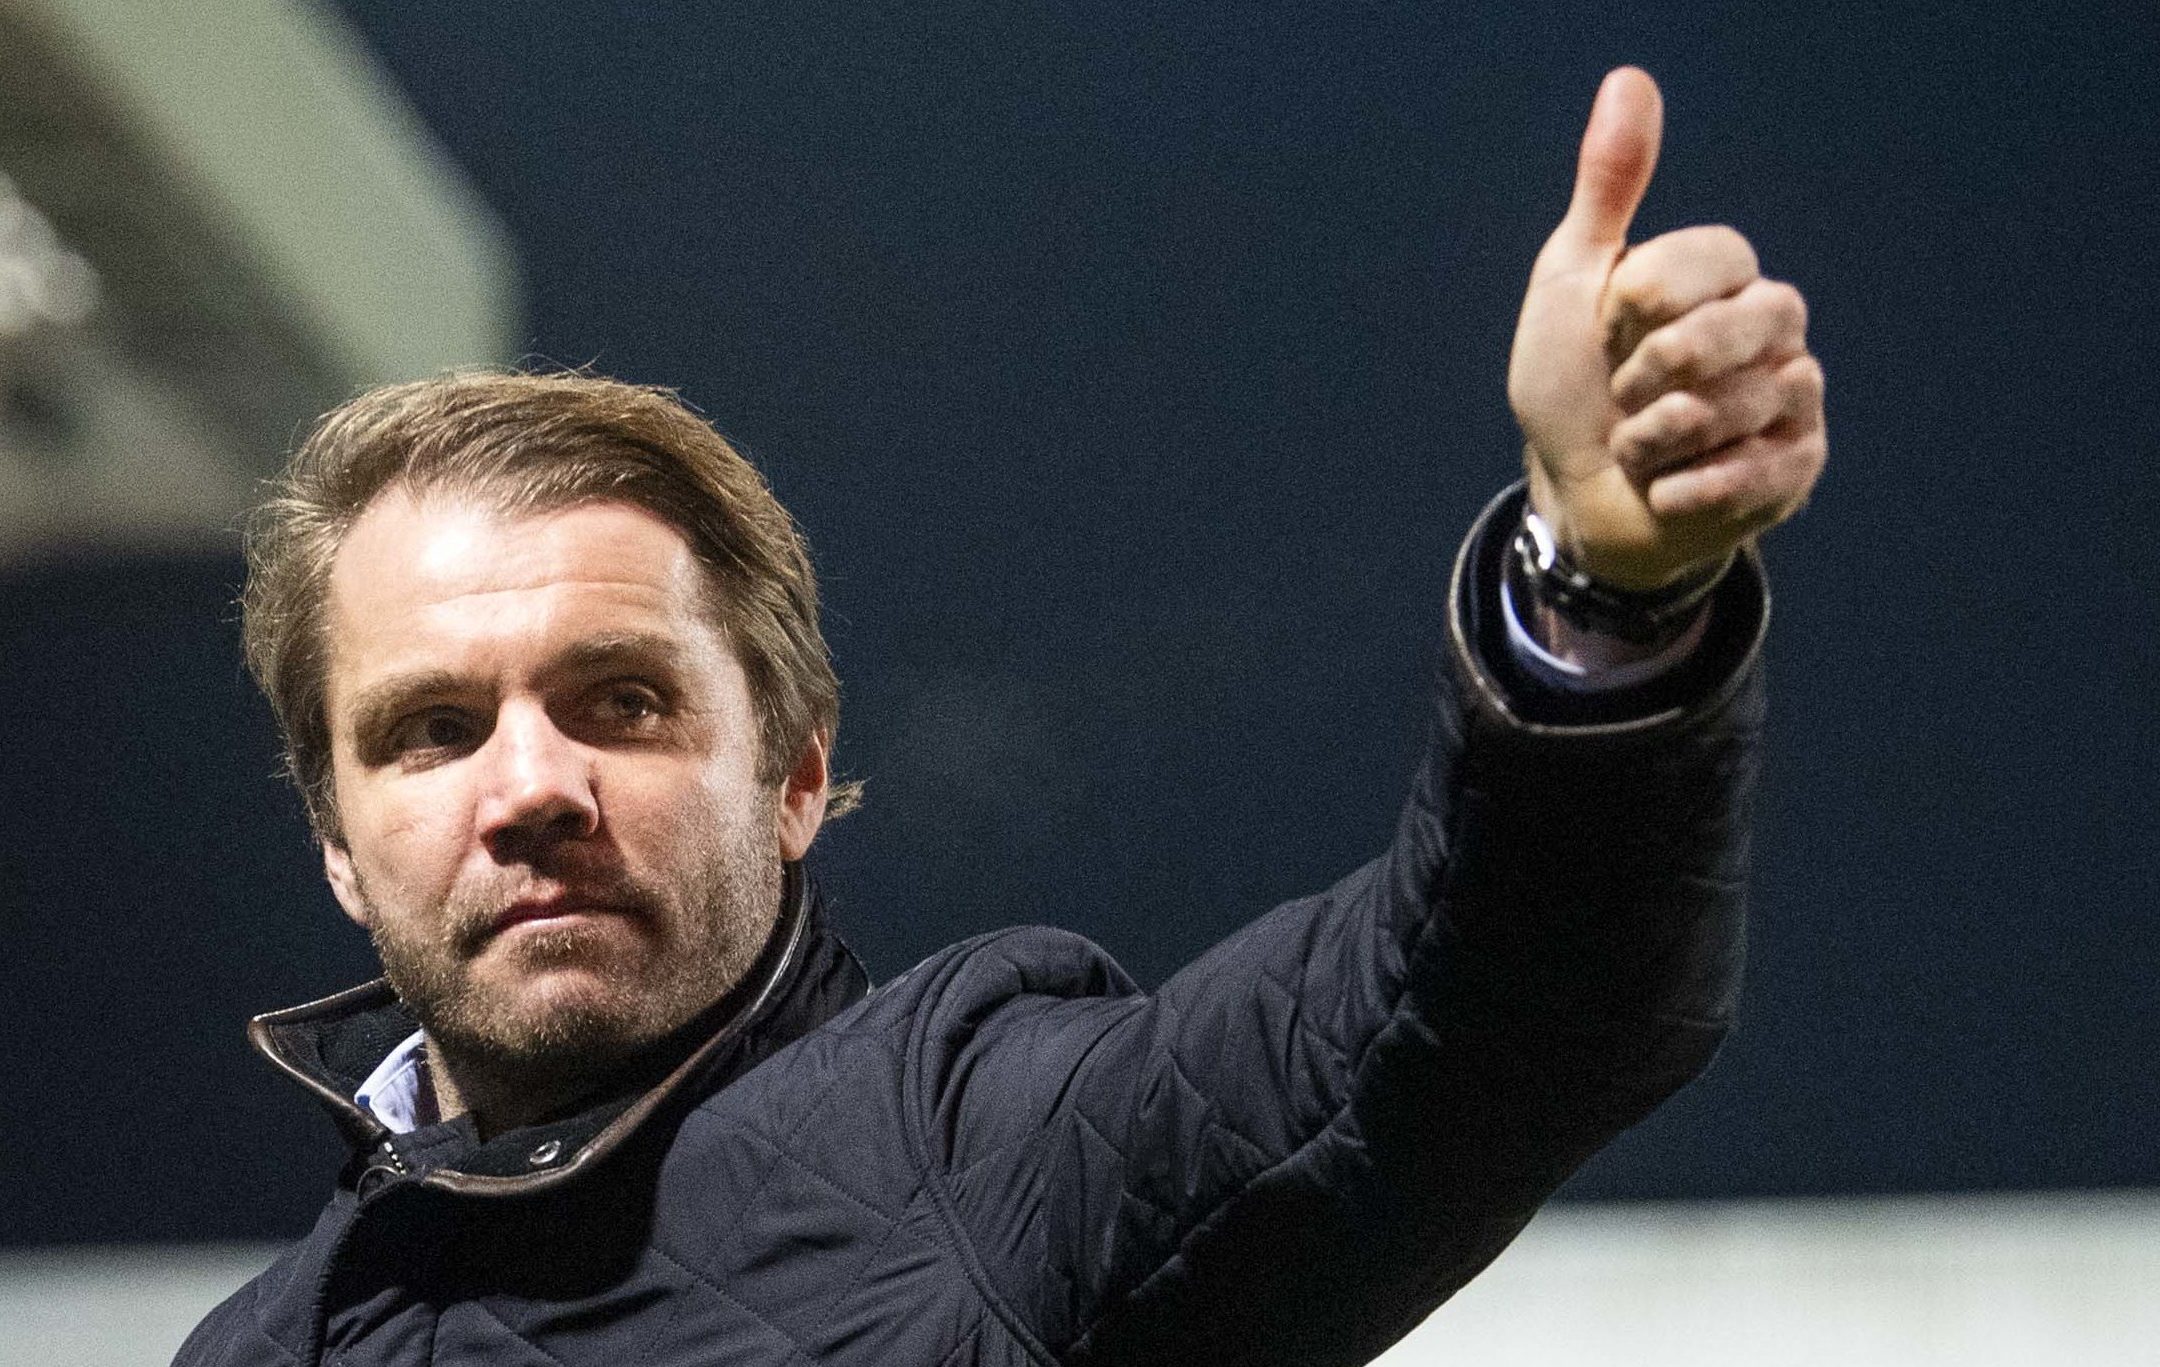 Robbie Neilson celebrates another victory.